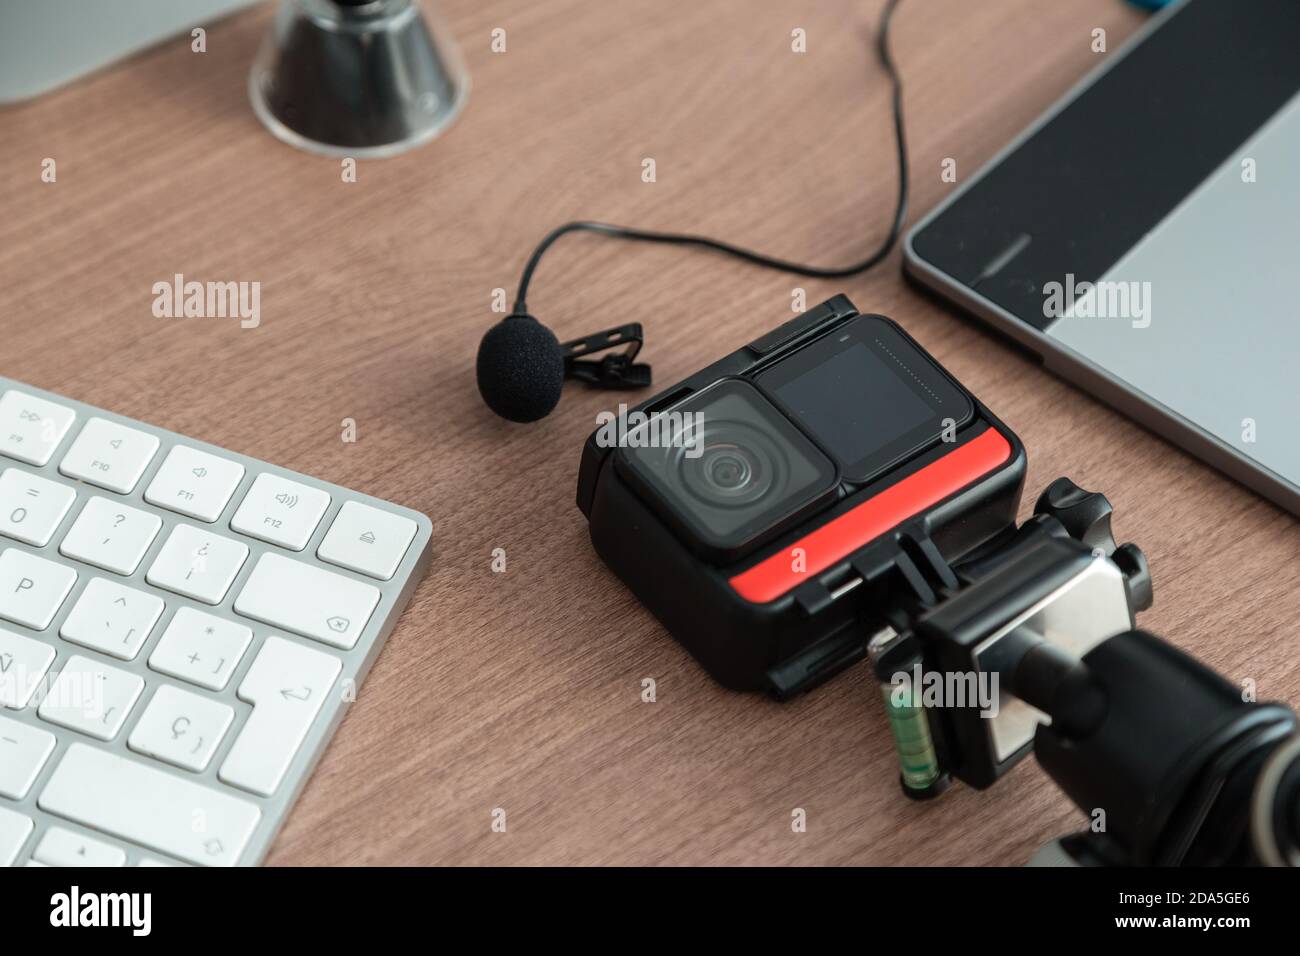 technological gadgets on the work desk, there is a camera, microphone, sd card, keyboard, technology and modern elements Stock Photo